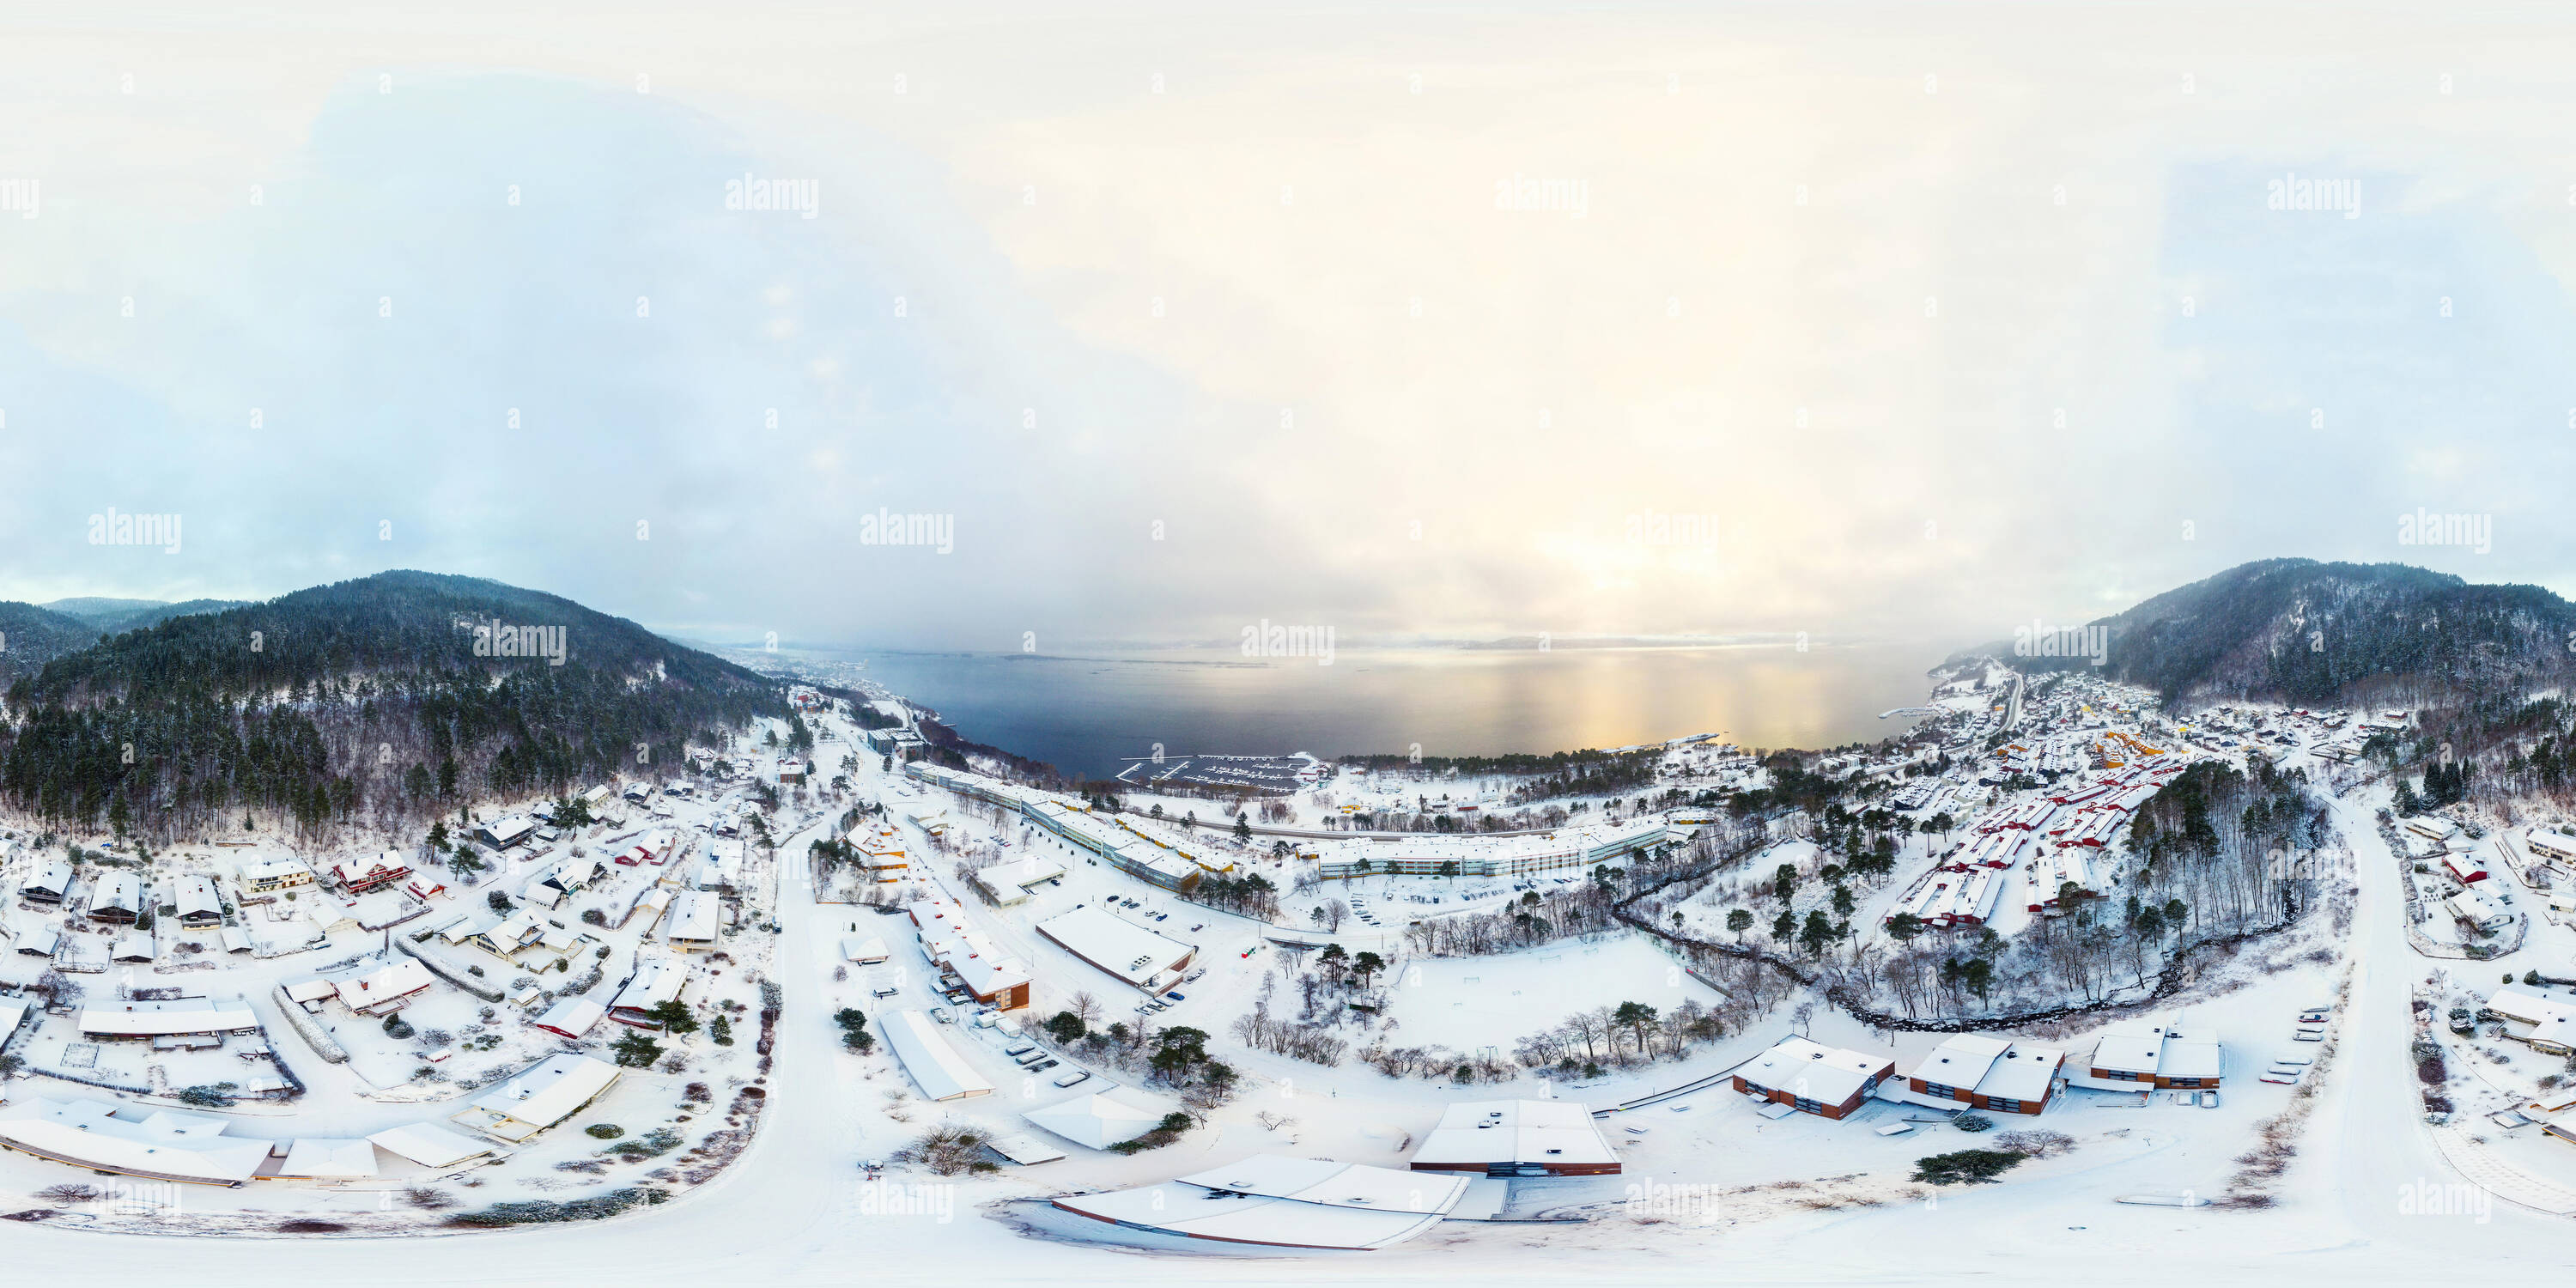 360 degree panoramic view of Molde, Norway. Aerial view of a residential area in Molde, Norway during a cloudy day in winter. The beautiful fjord with mountains covered in snow